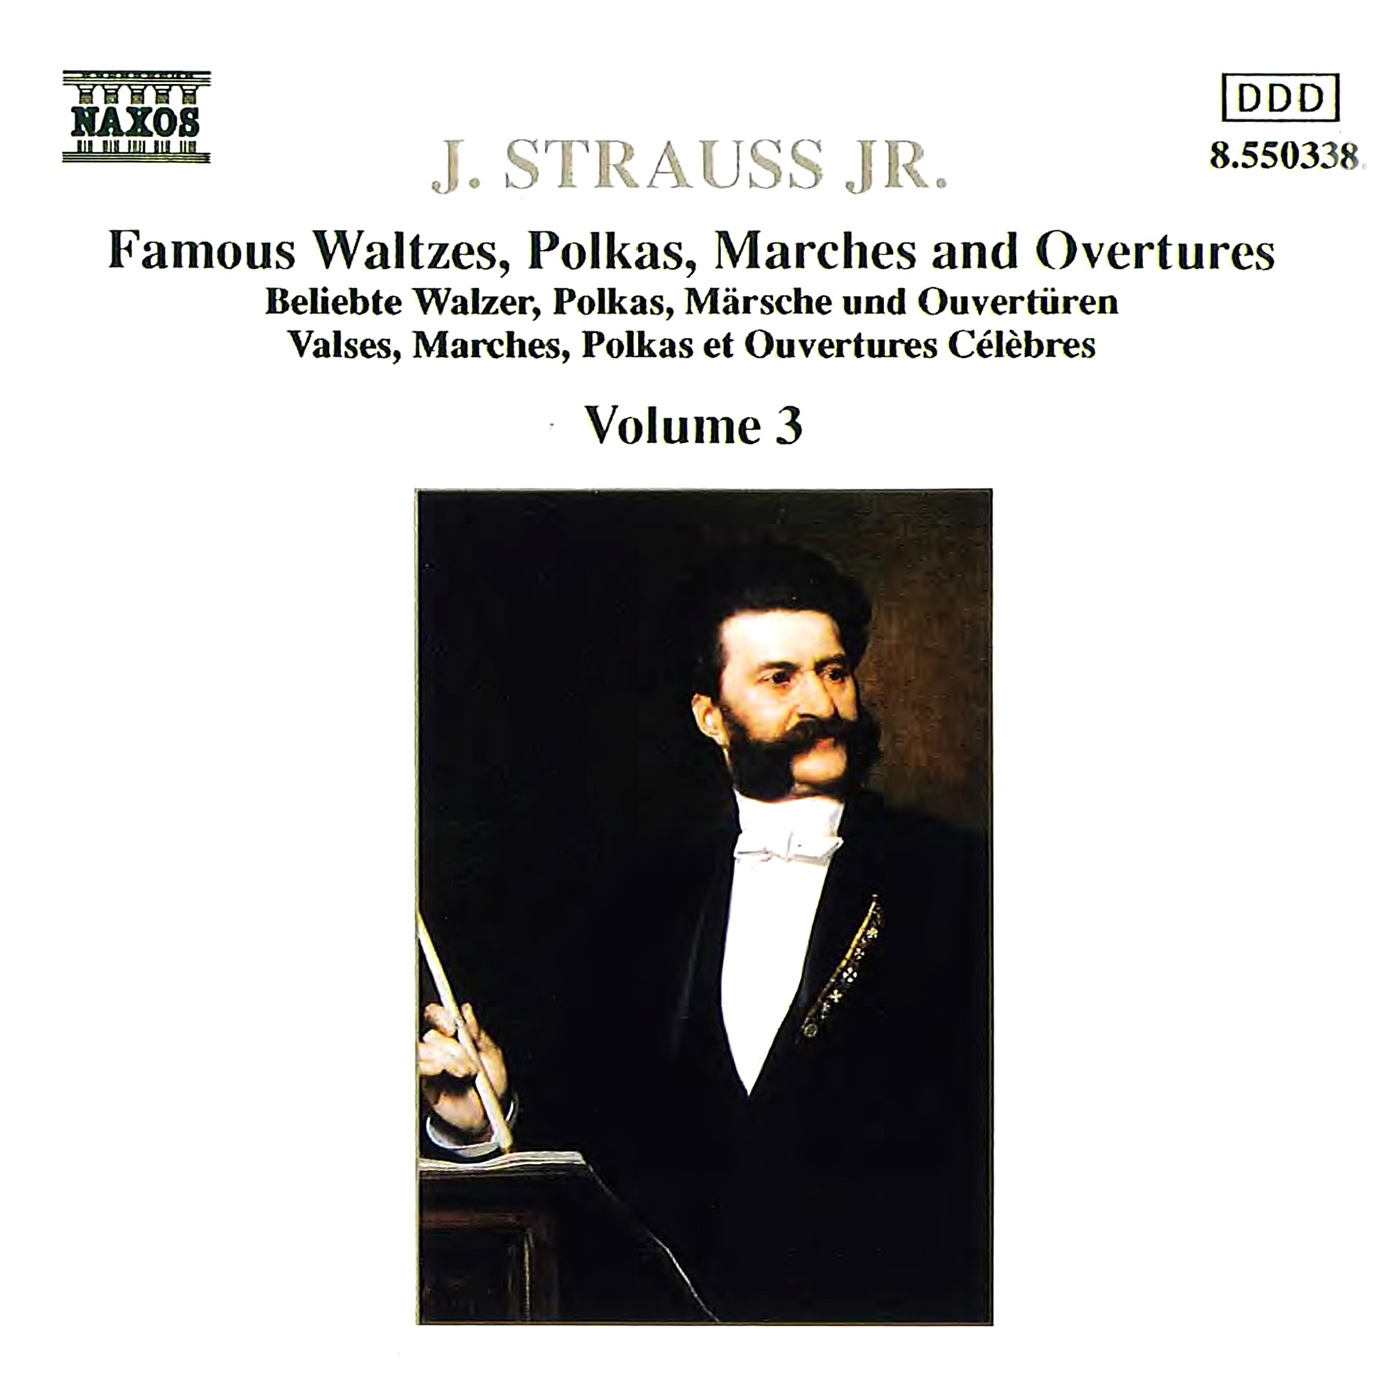 STRAUSS II, J.: Waltzes, Polkas, Marches and Overtures, Vol.  3